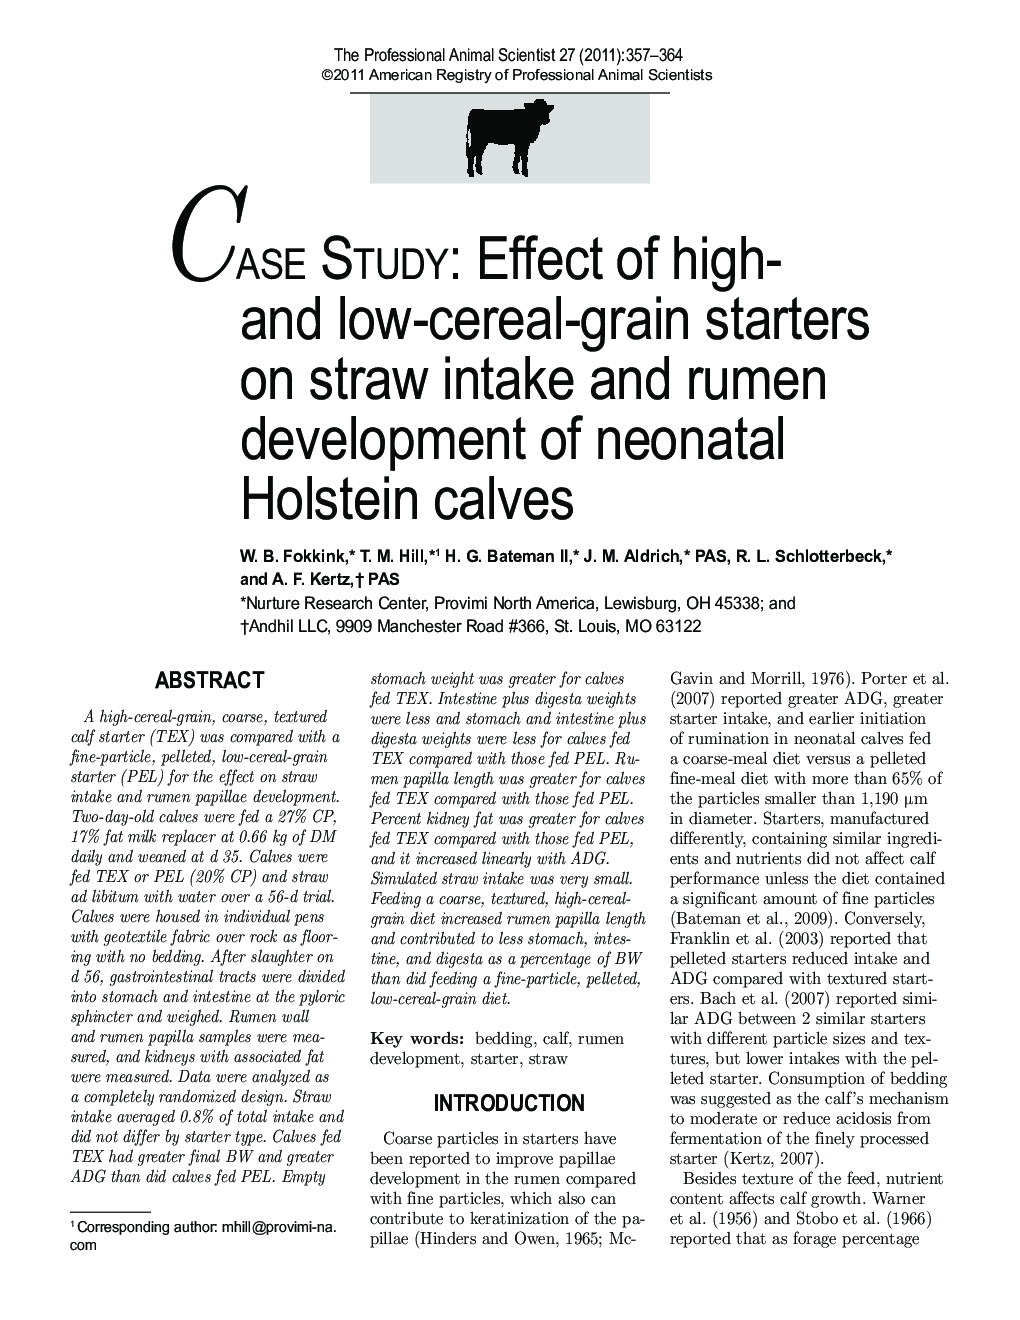 CASE STUDY: Effect of high- and low-cereal-grain starters on straw intake and rumen development of neonatal Holstein calves